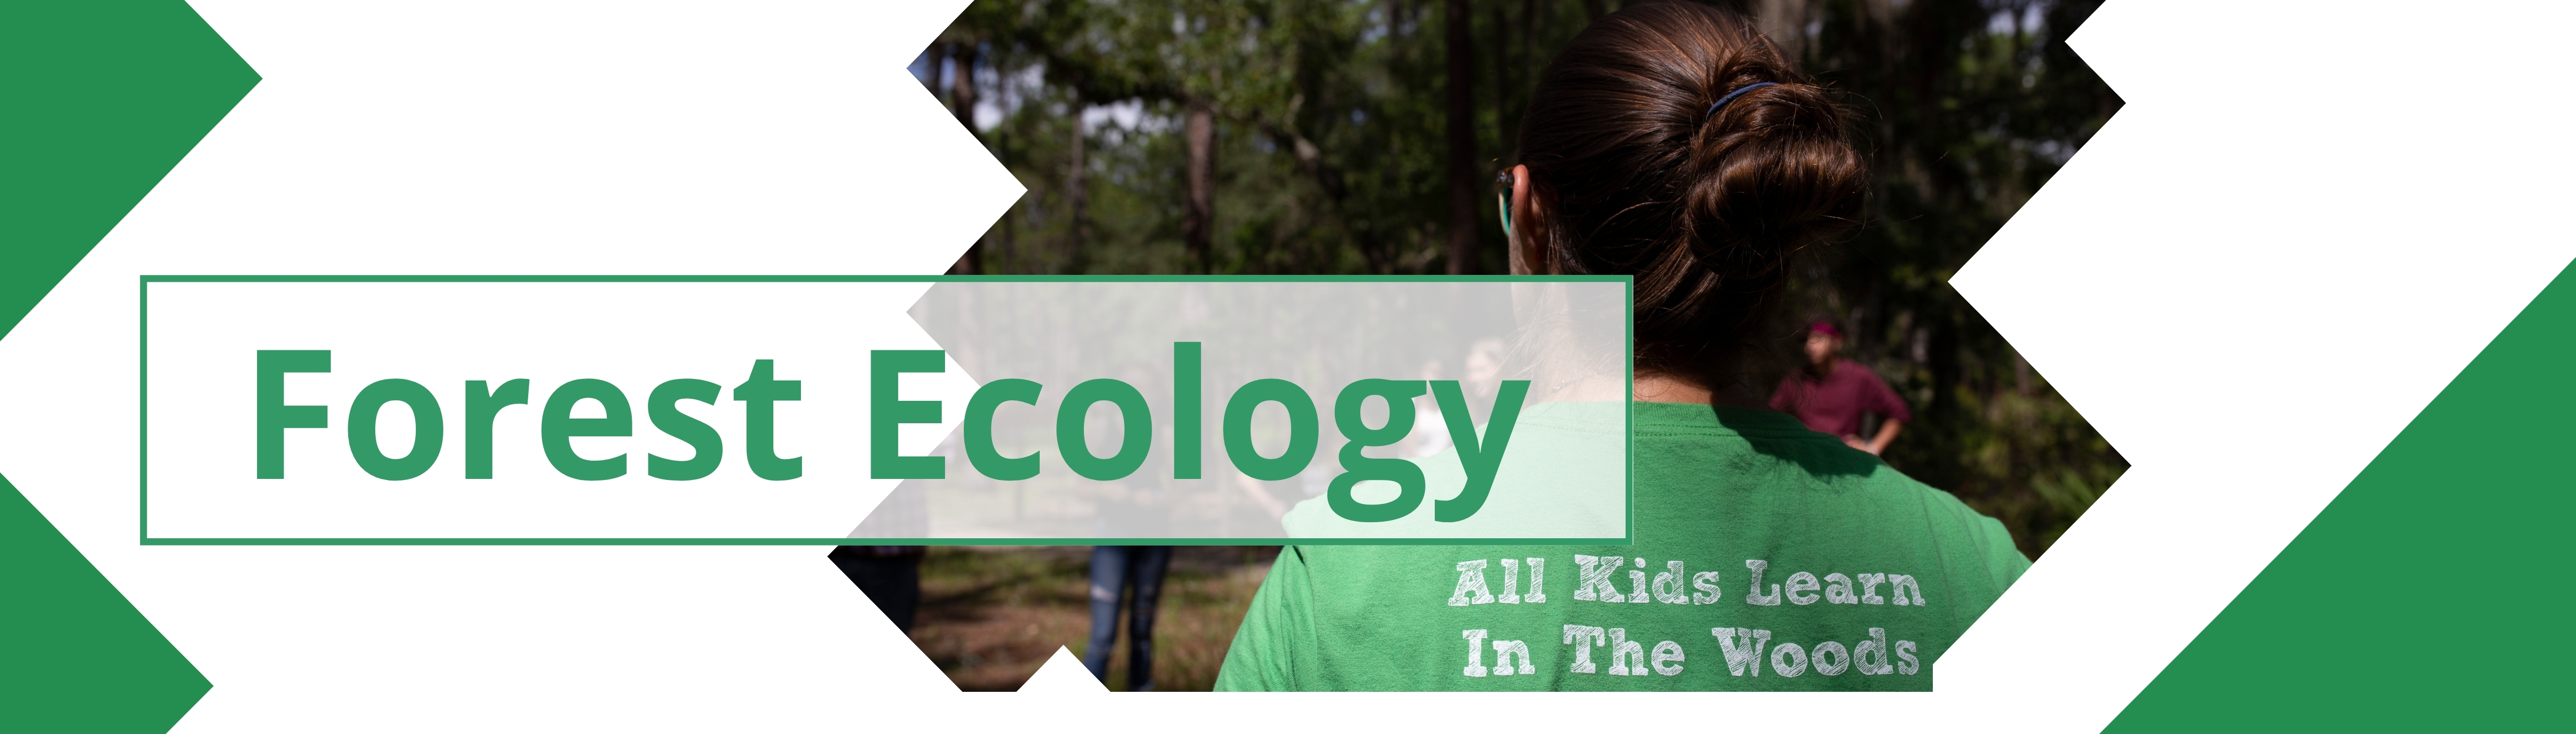 Graphic banner of youth learning about forestry and the environment